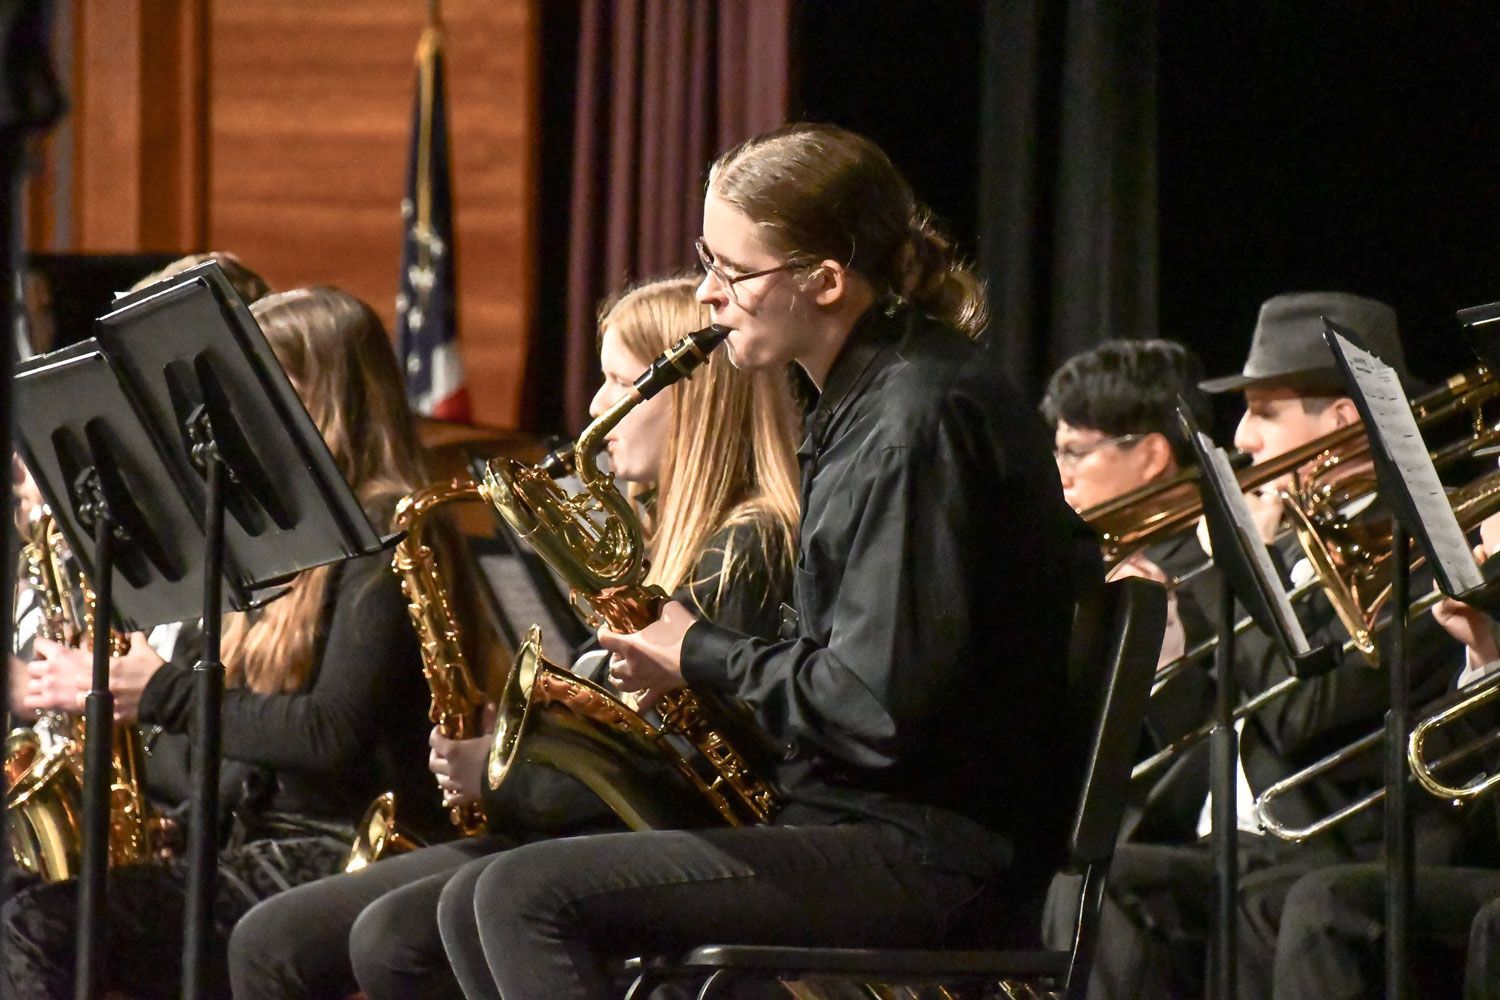 Band students playing instruments - saxophones are featured